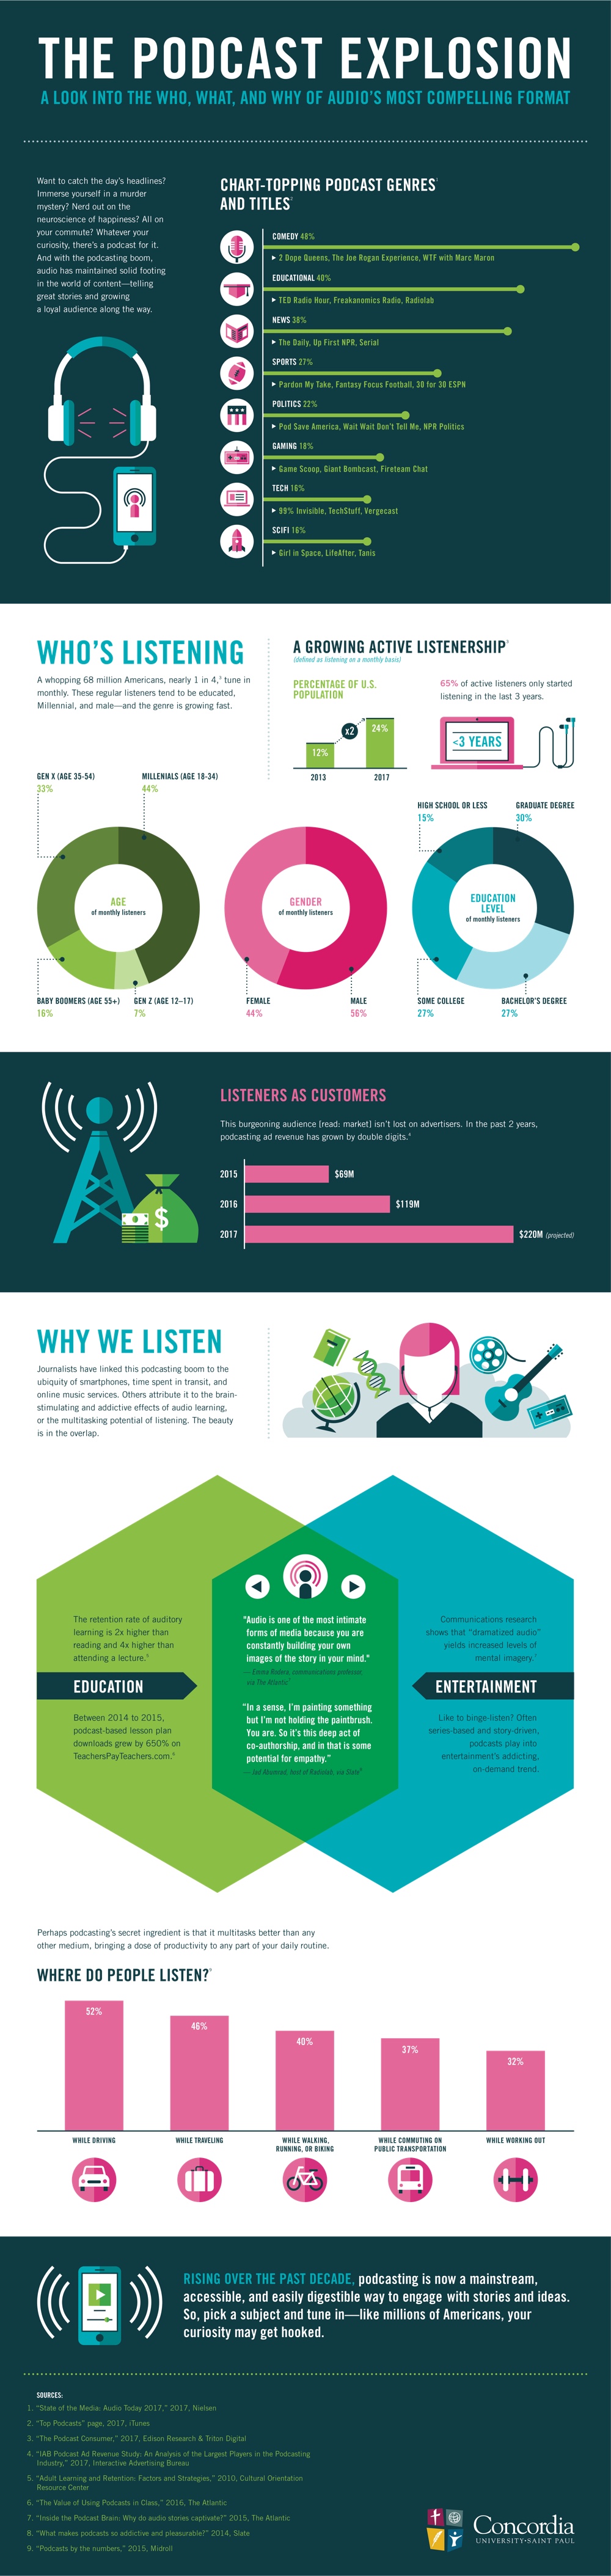 The Podcasting Boom Explained in One Infographic